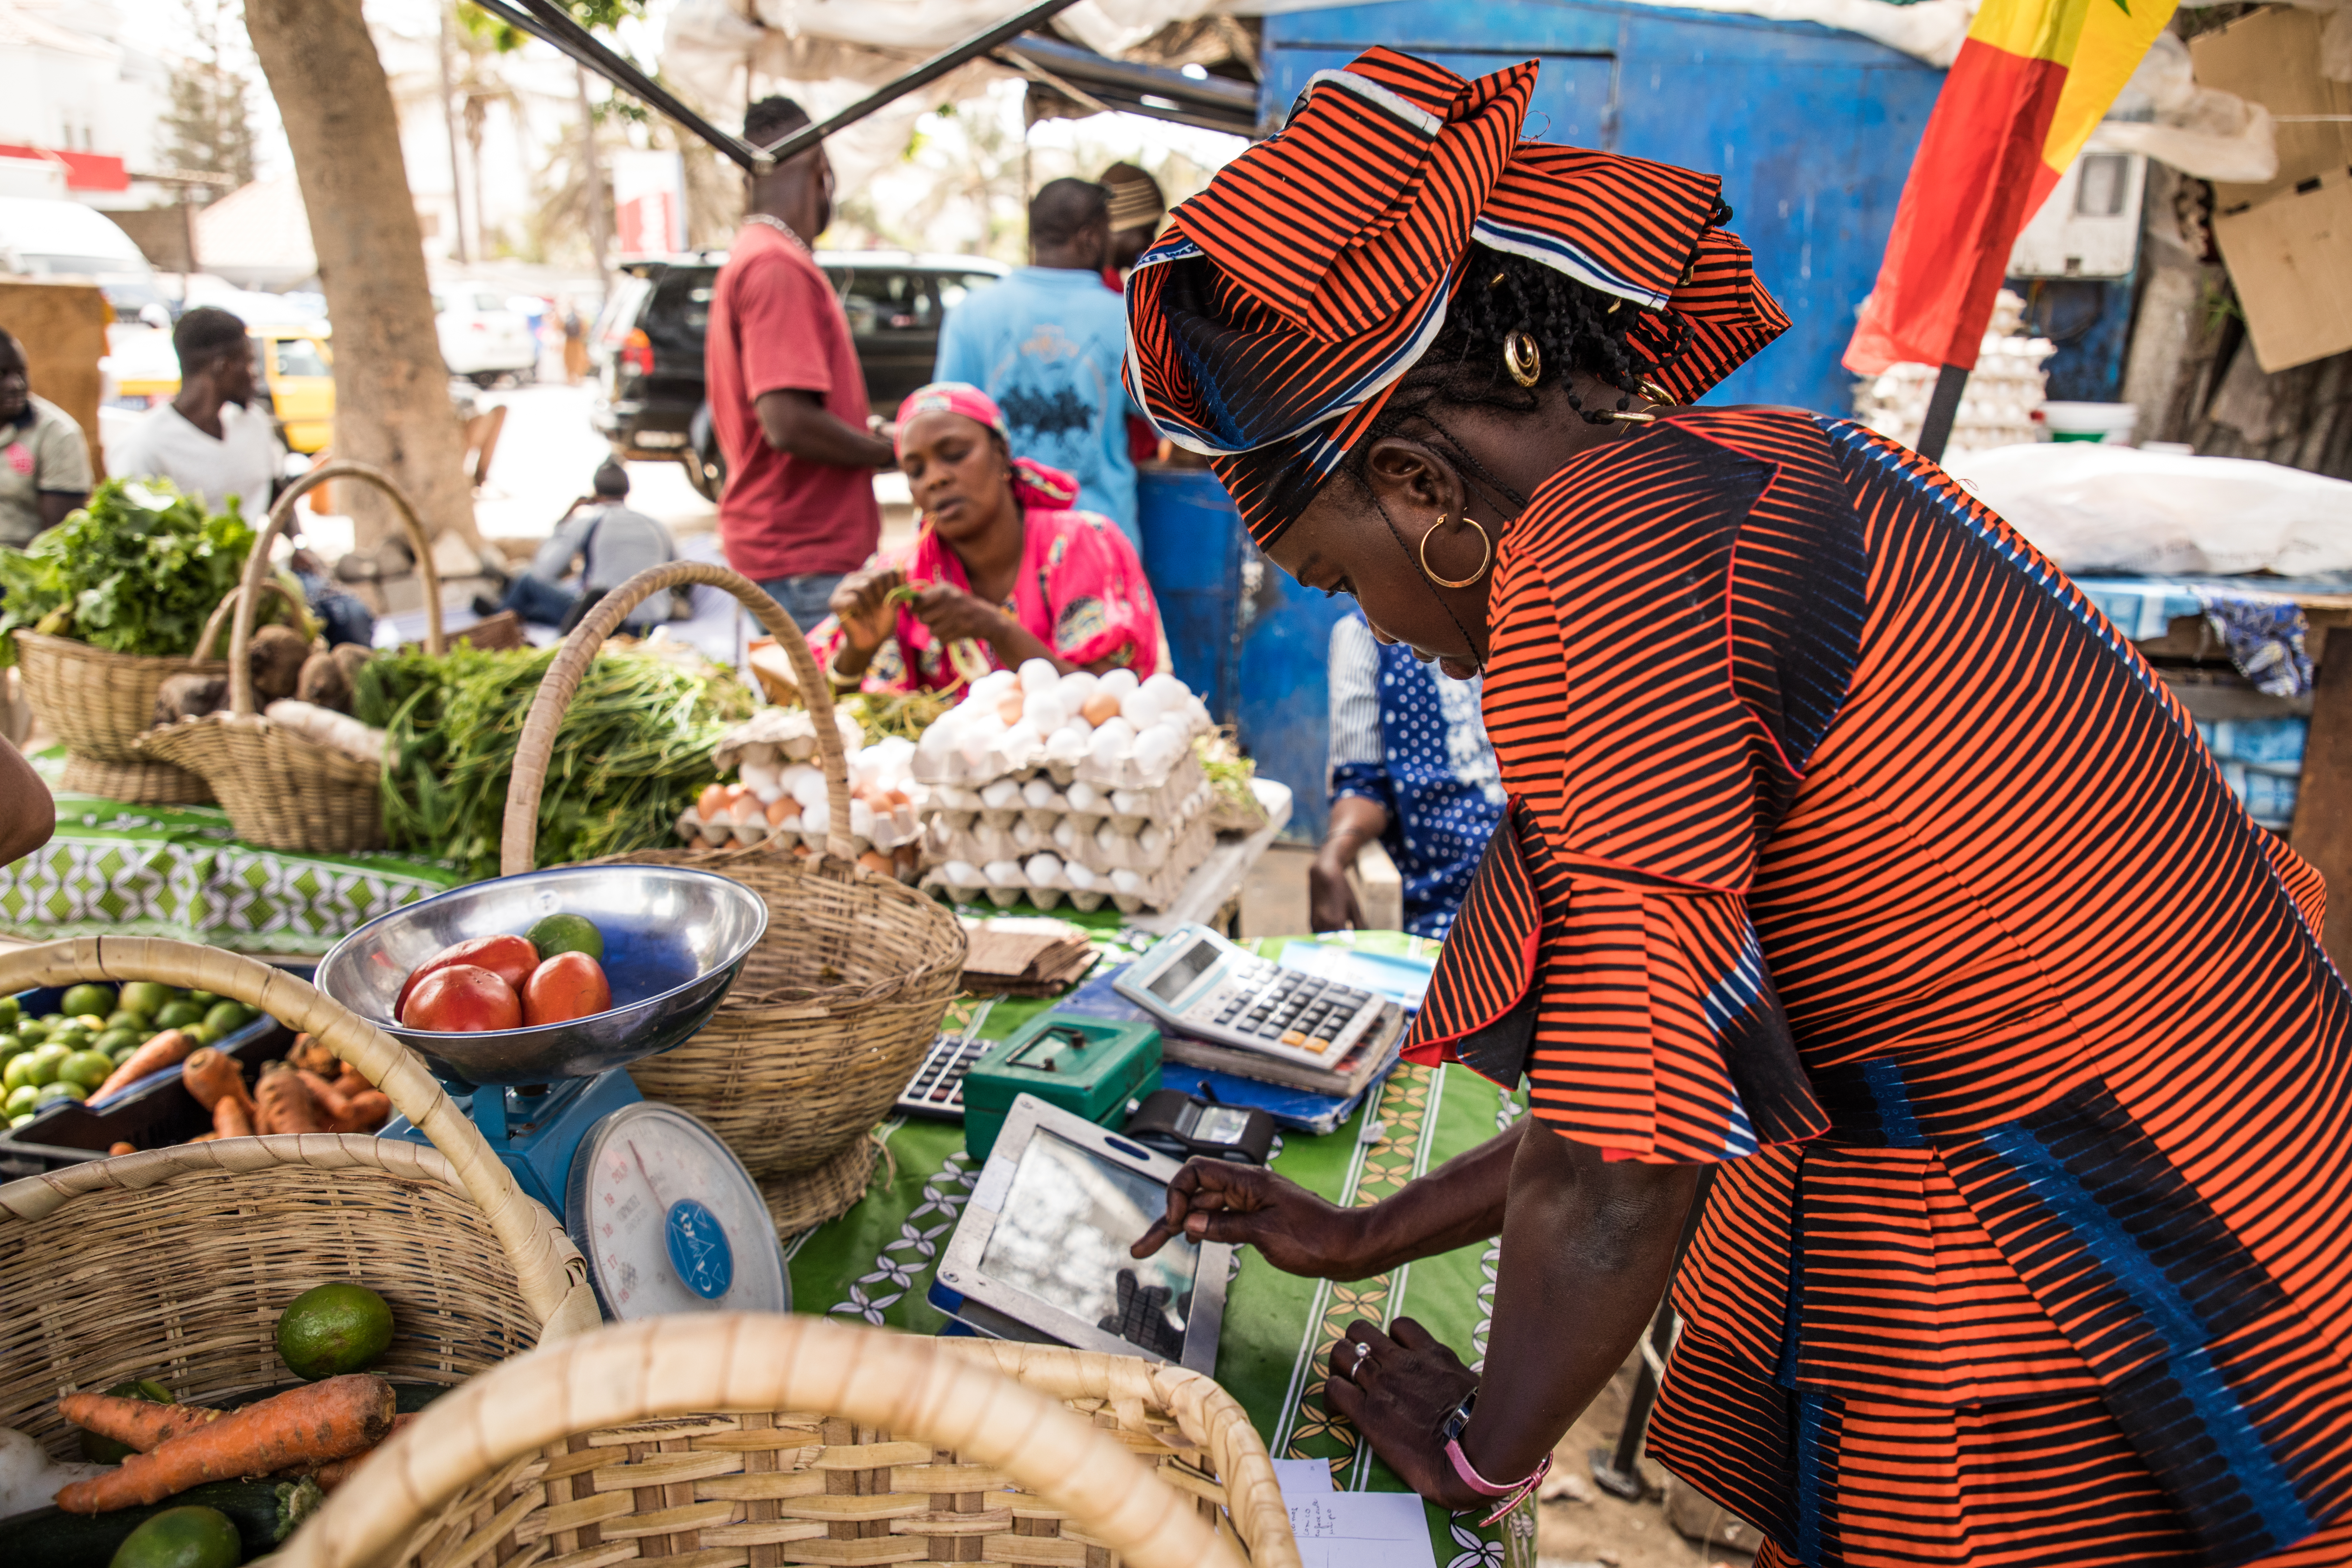  Dakar, Senegal.  Binta is filling the vegetables she sells on her Weebi tablet. The application has helped her manage her stock and sales. Photo: Vincent Tremeau / World Bank